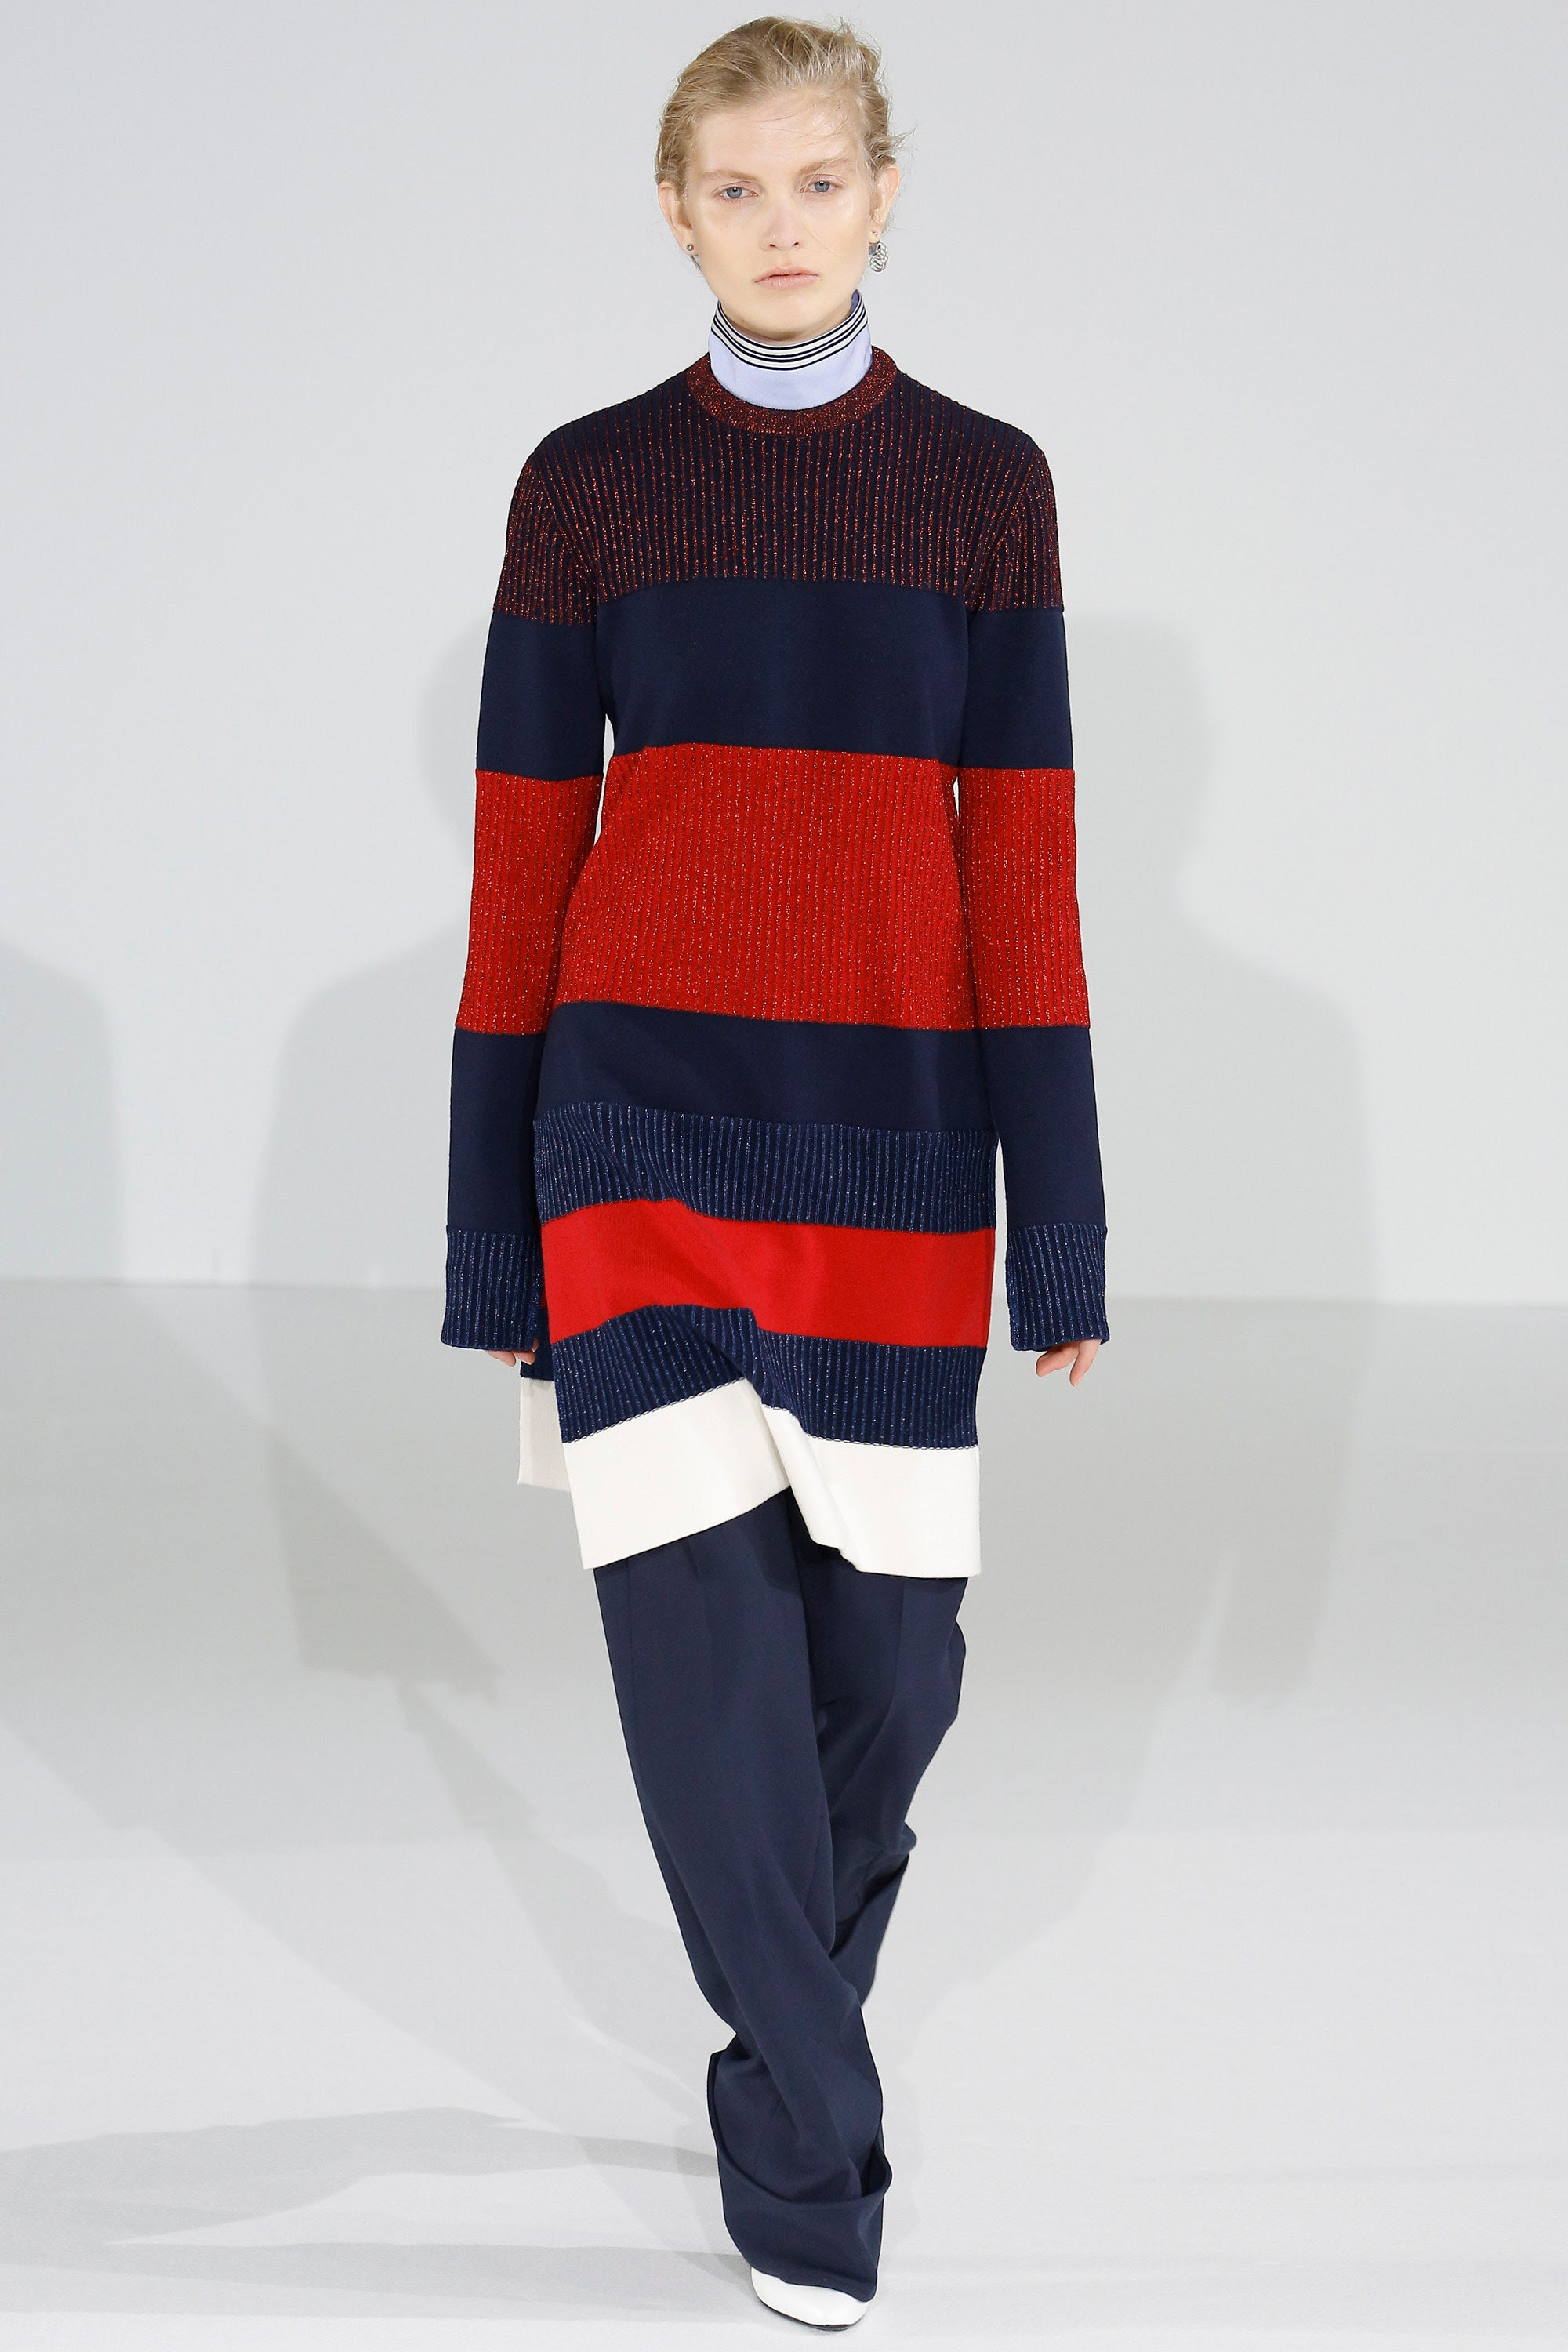 DIARY OF A CLOTHESHORSE: Cédric Charlier AW 16 #PFW